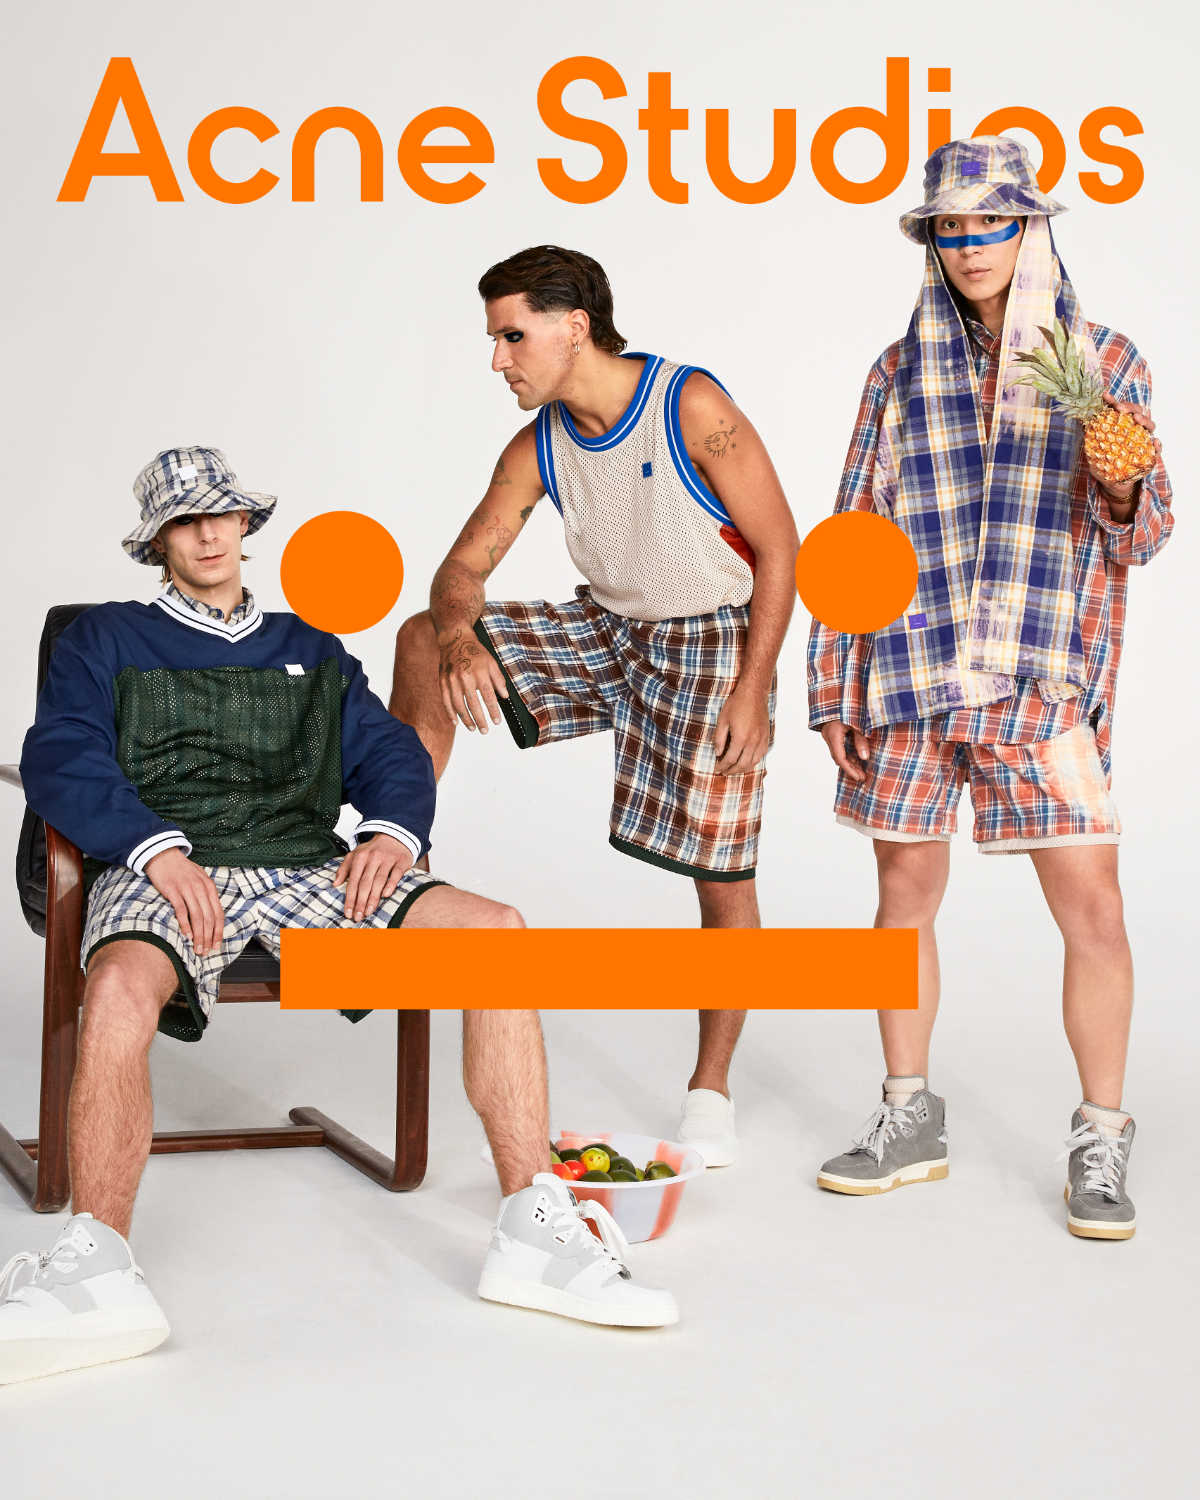 Acne Studios Presents Its Fall/Winter 2021 Face Collection